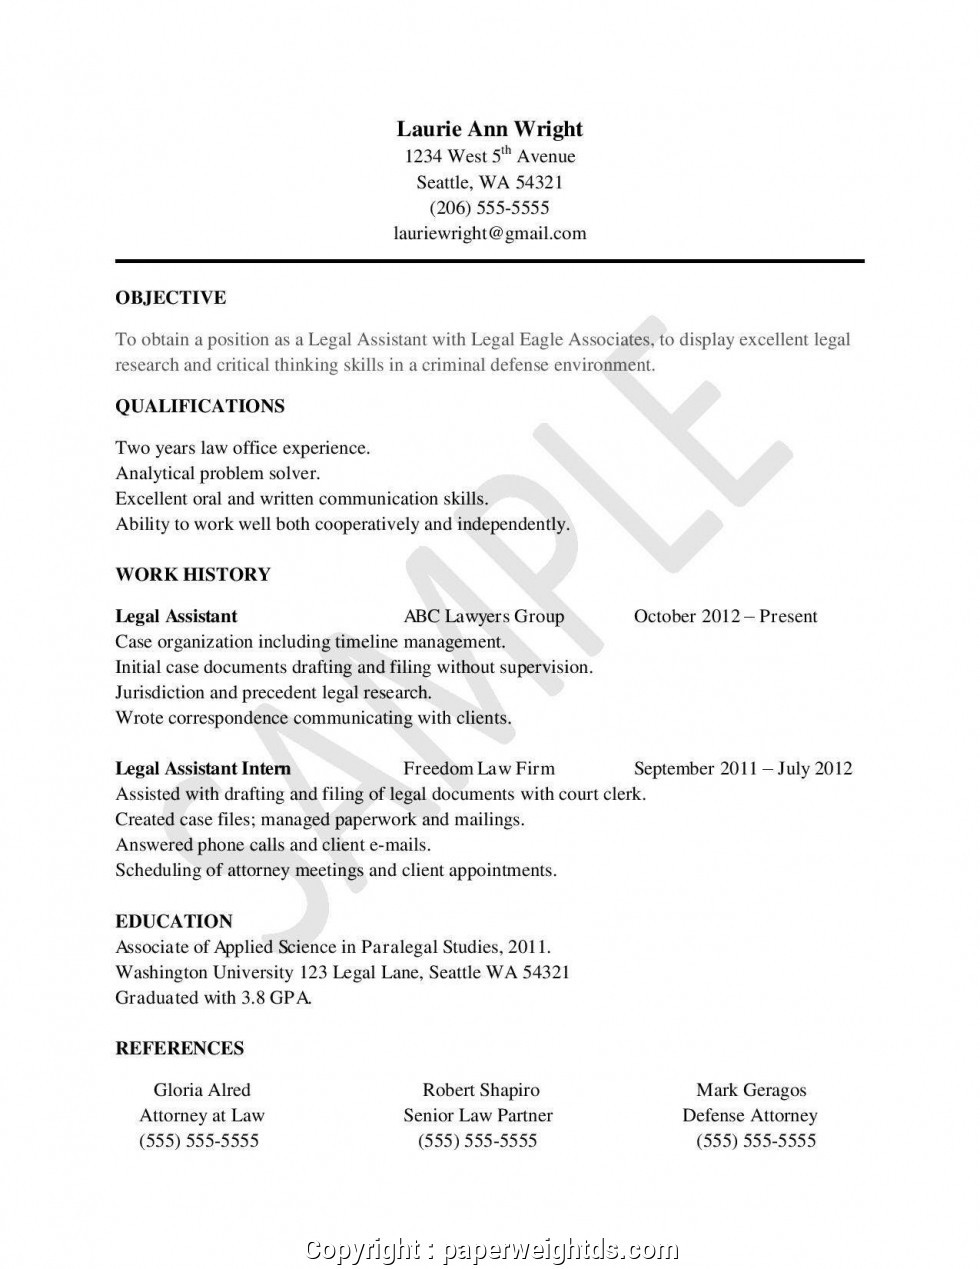 resume without experienceml